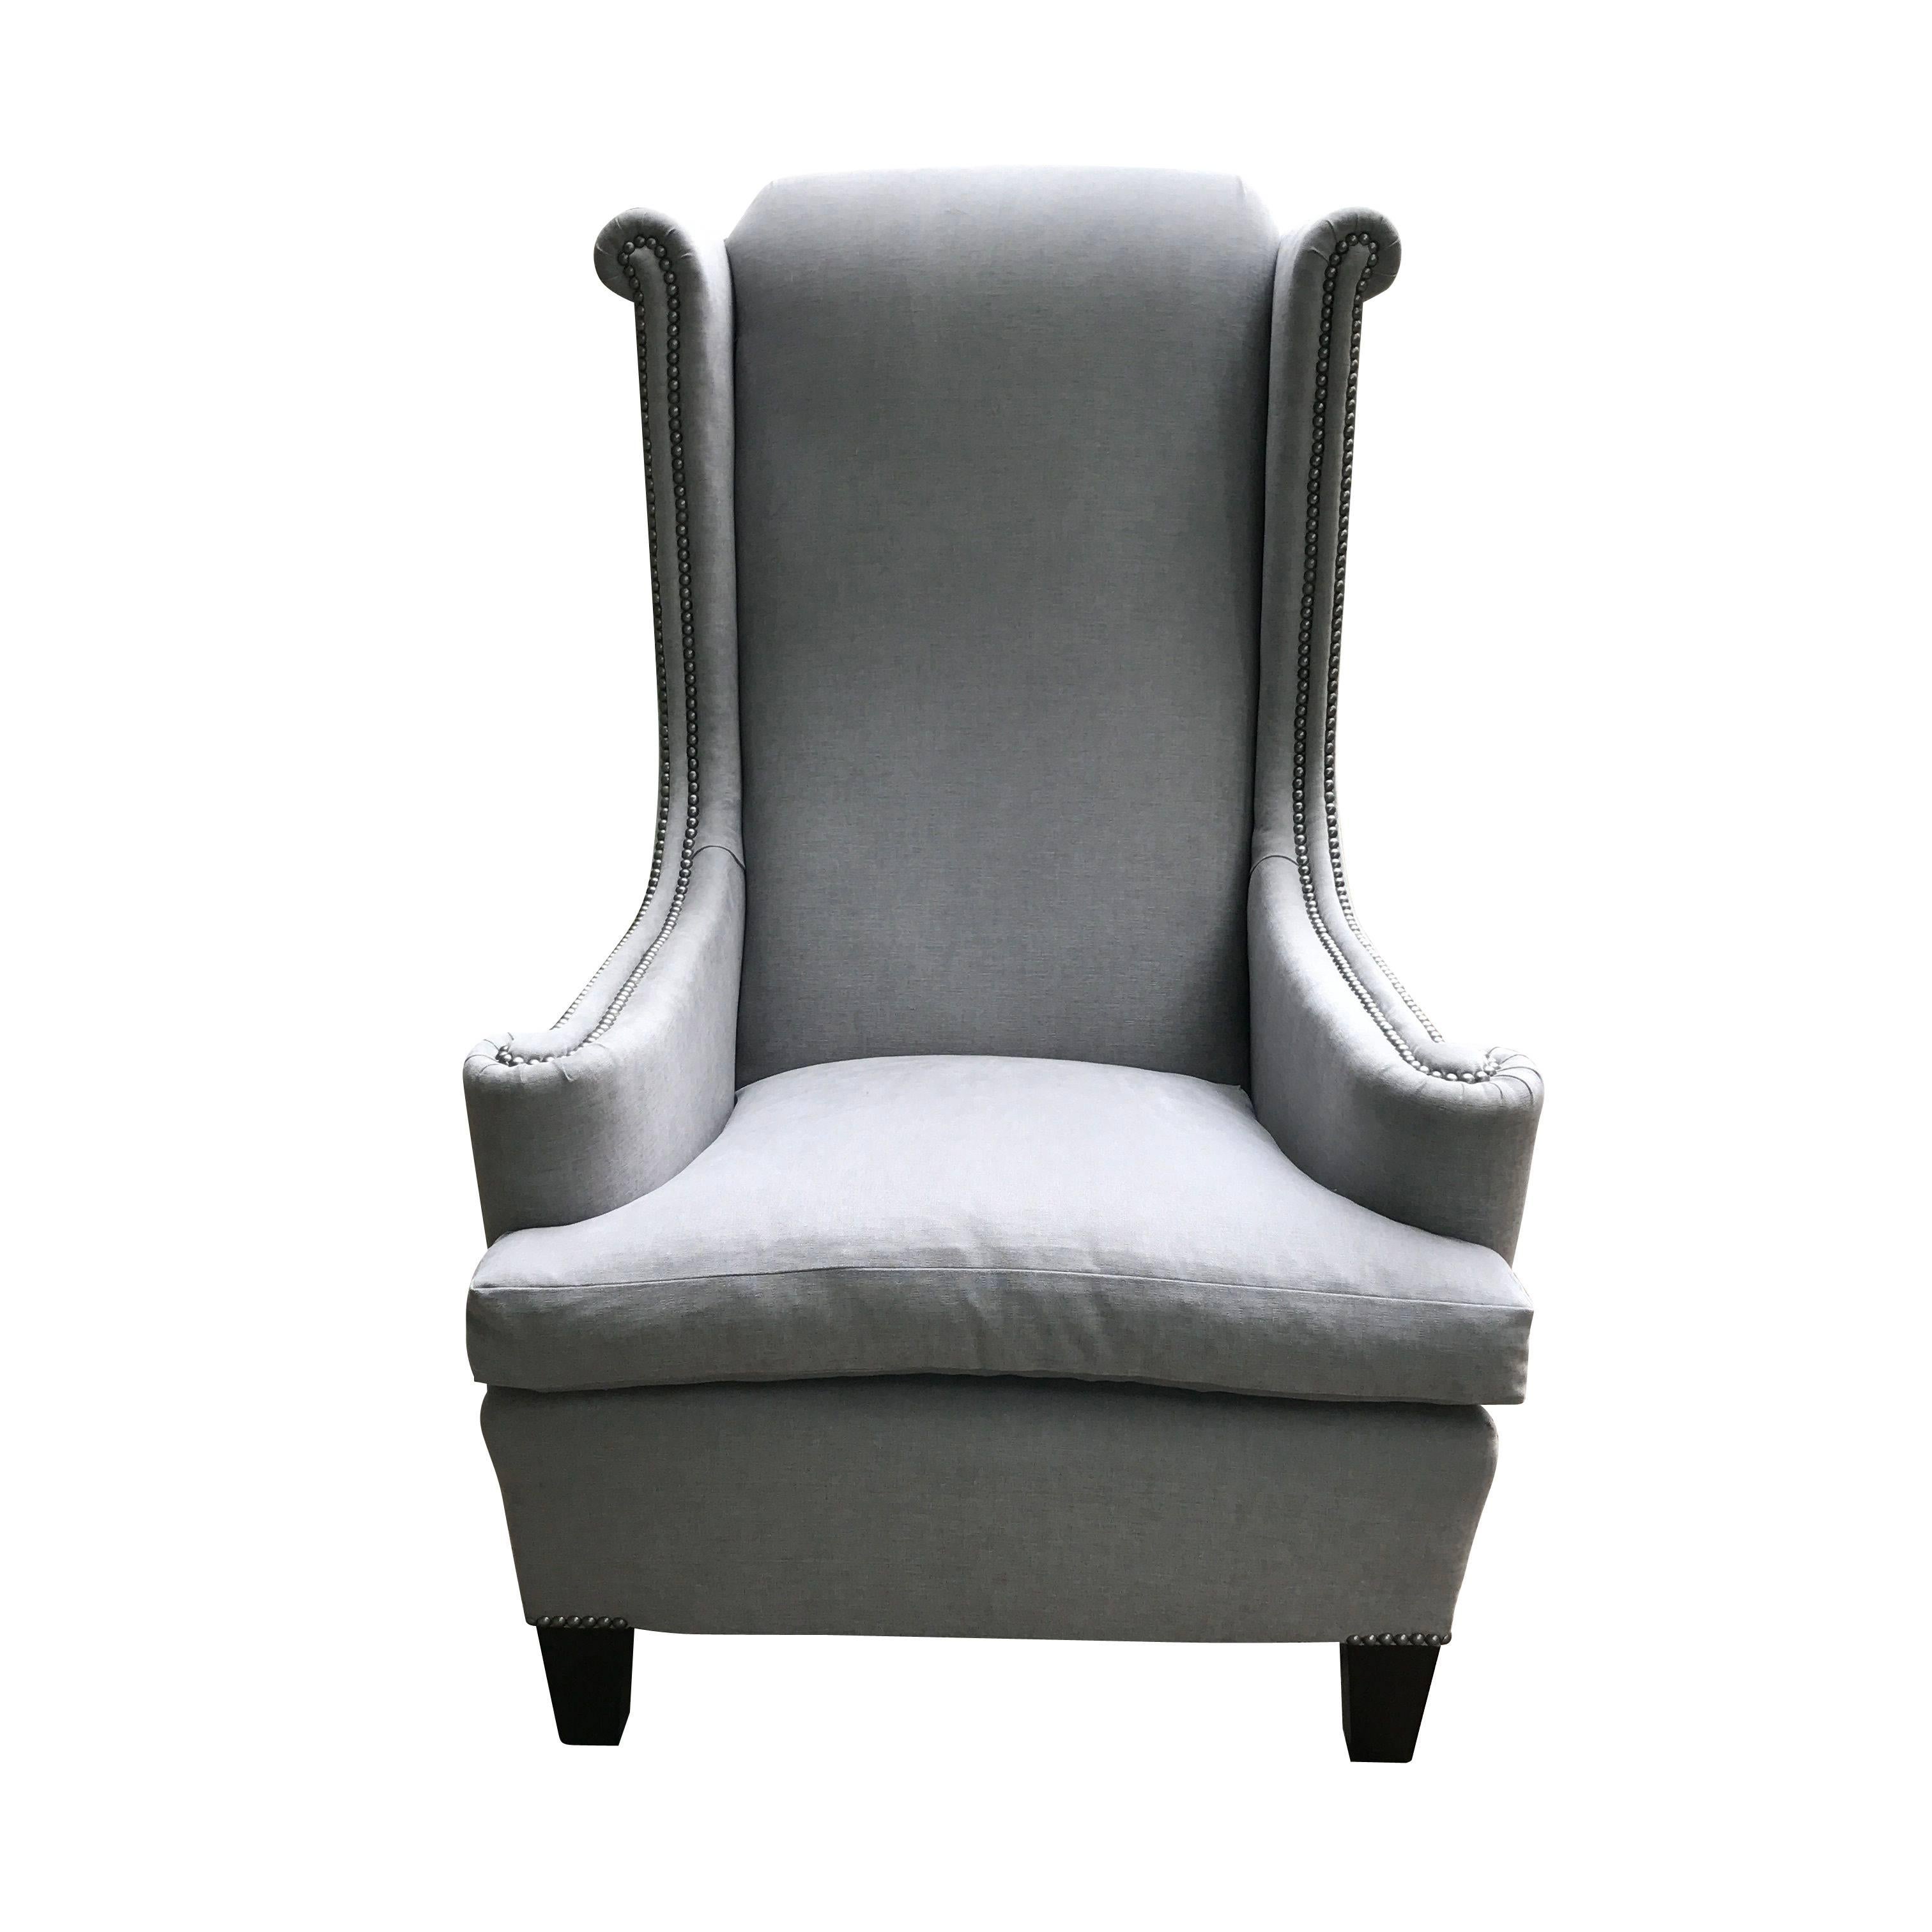 1920s French recently reupholstered high back single side chair.
Decorative nailhead accents frame back of chair and arms.
Very comfortable cushioned seat.
Brushed light grey canvas upholstery.